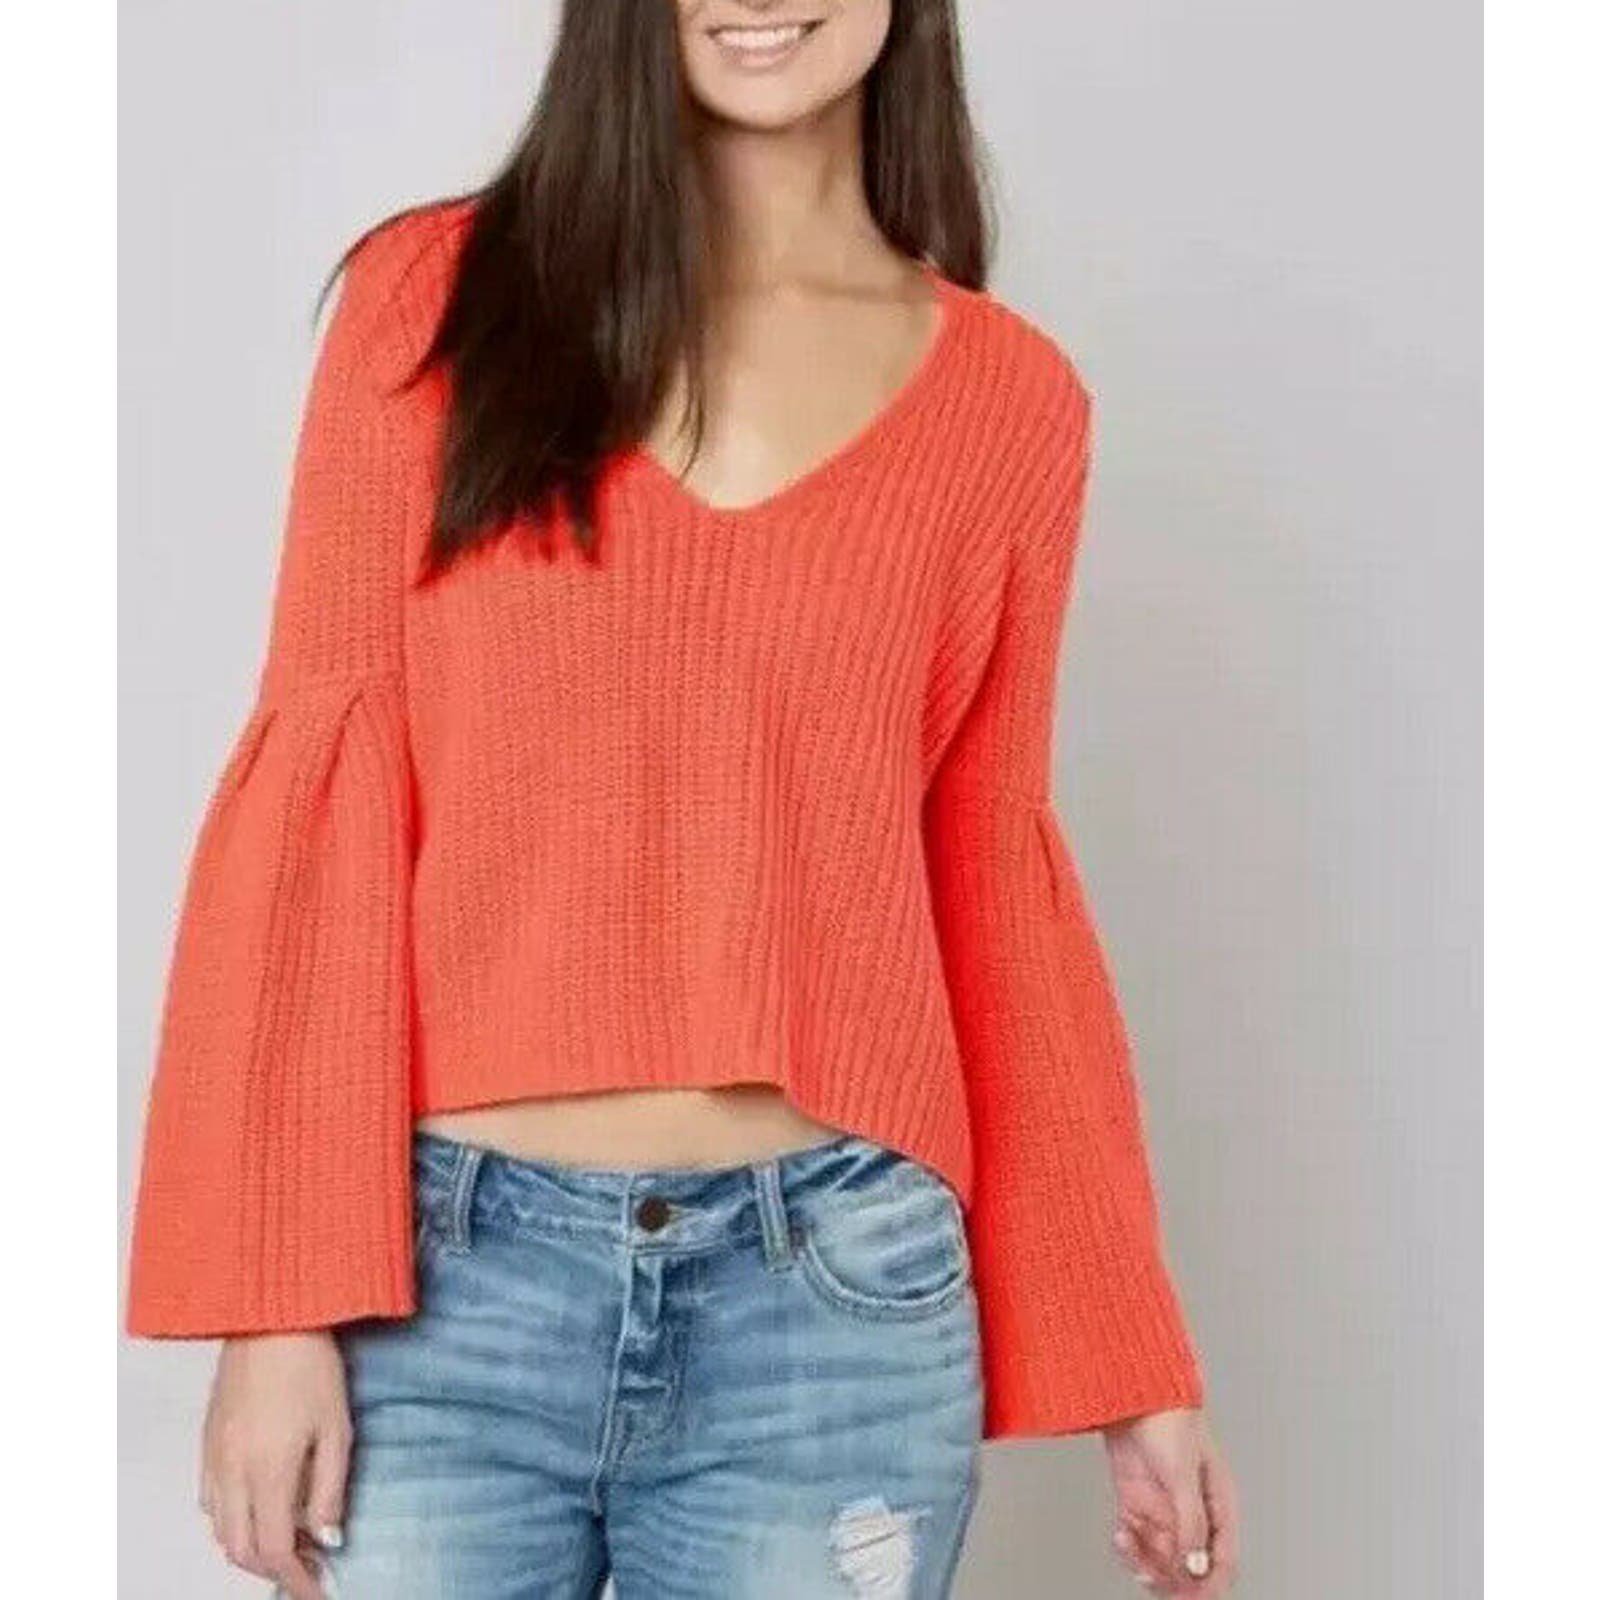 Nice Free People Damsel Cable Knit, Bell Sleeve, Pullov